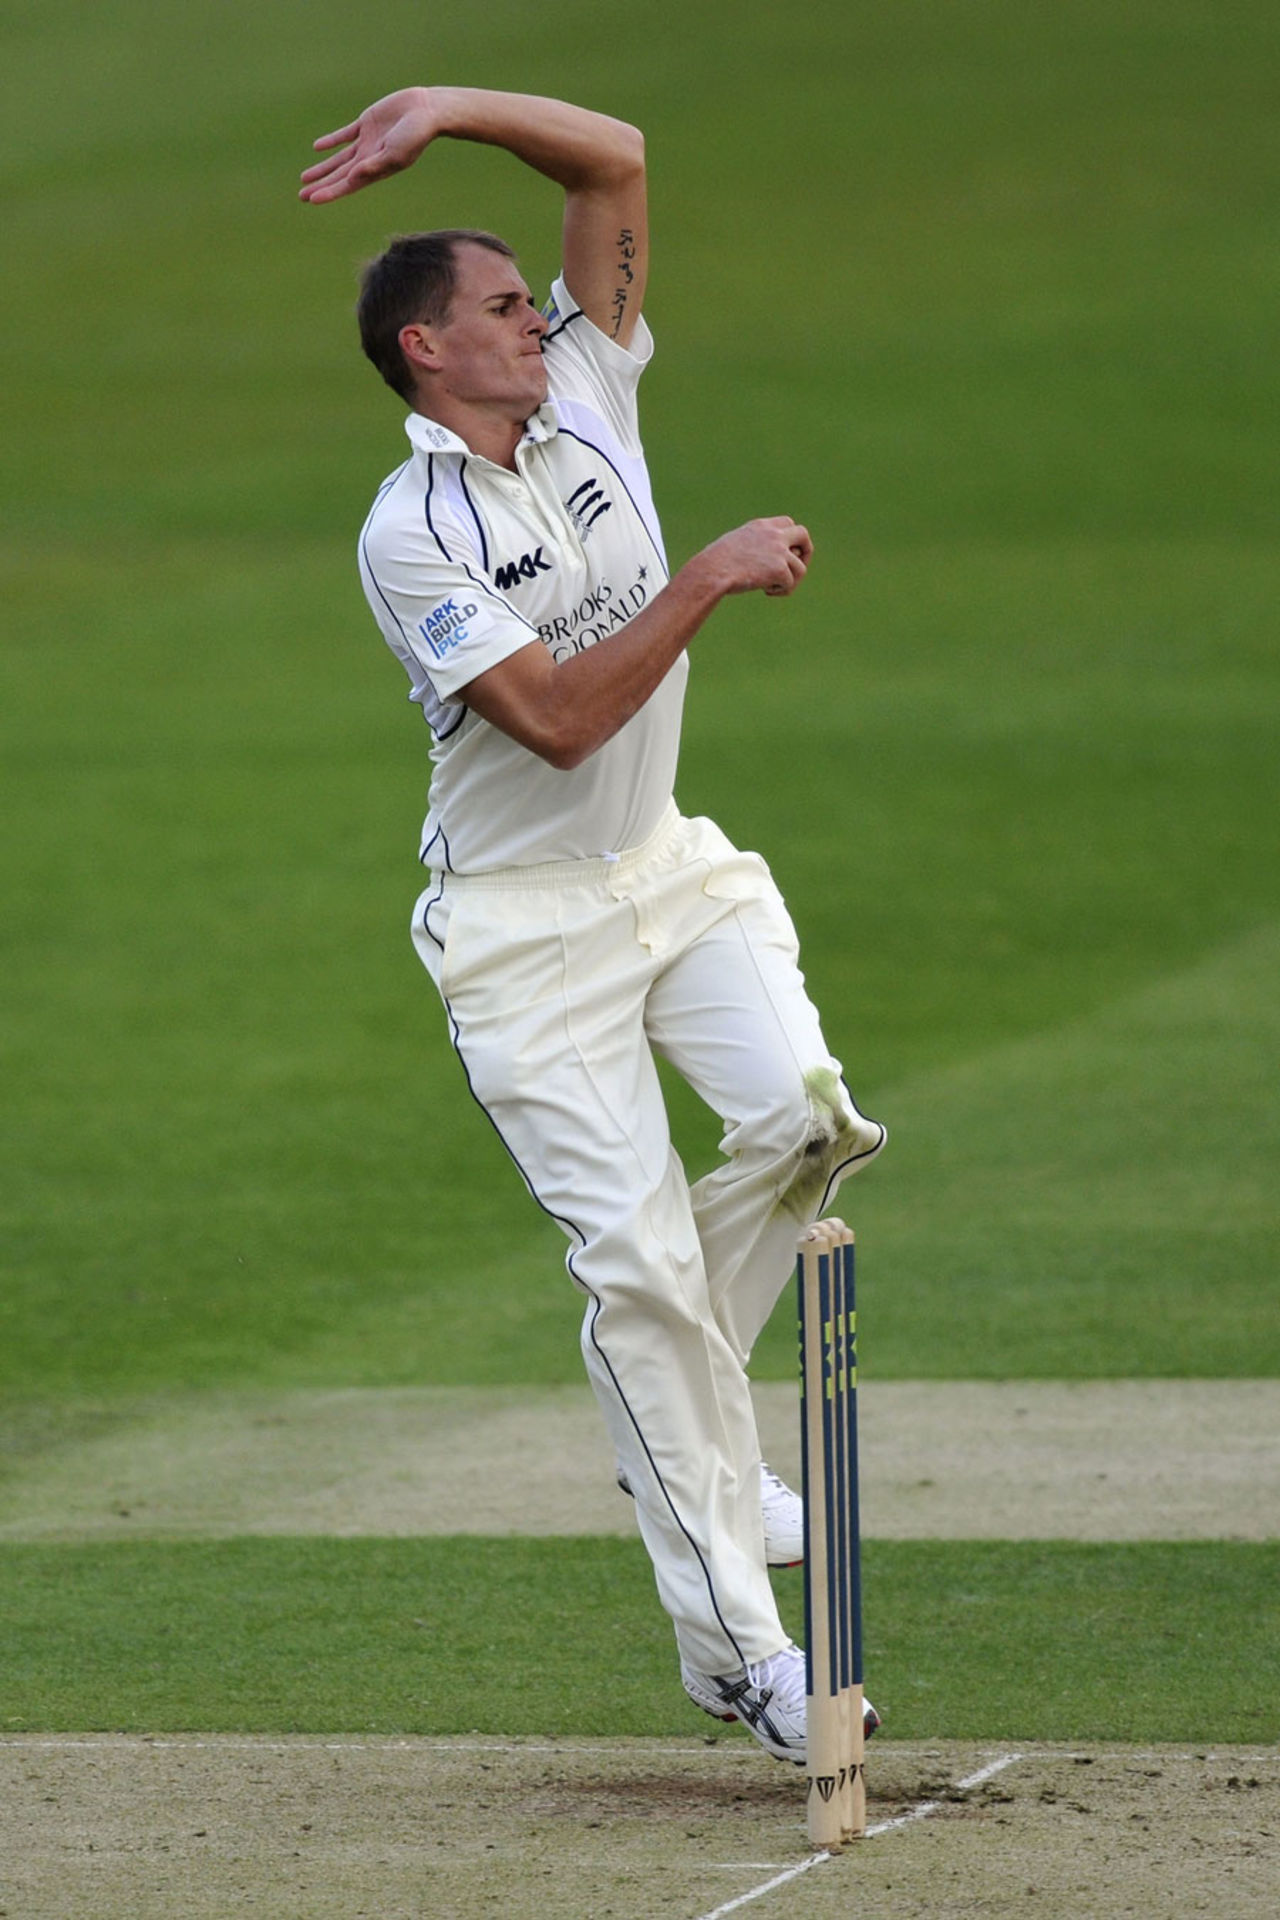 Neil Dexter arrives at the wicket to bowl, Middlesex v Surrey, County Championship, Division One, April 12-15, 2012